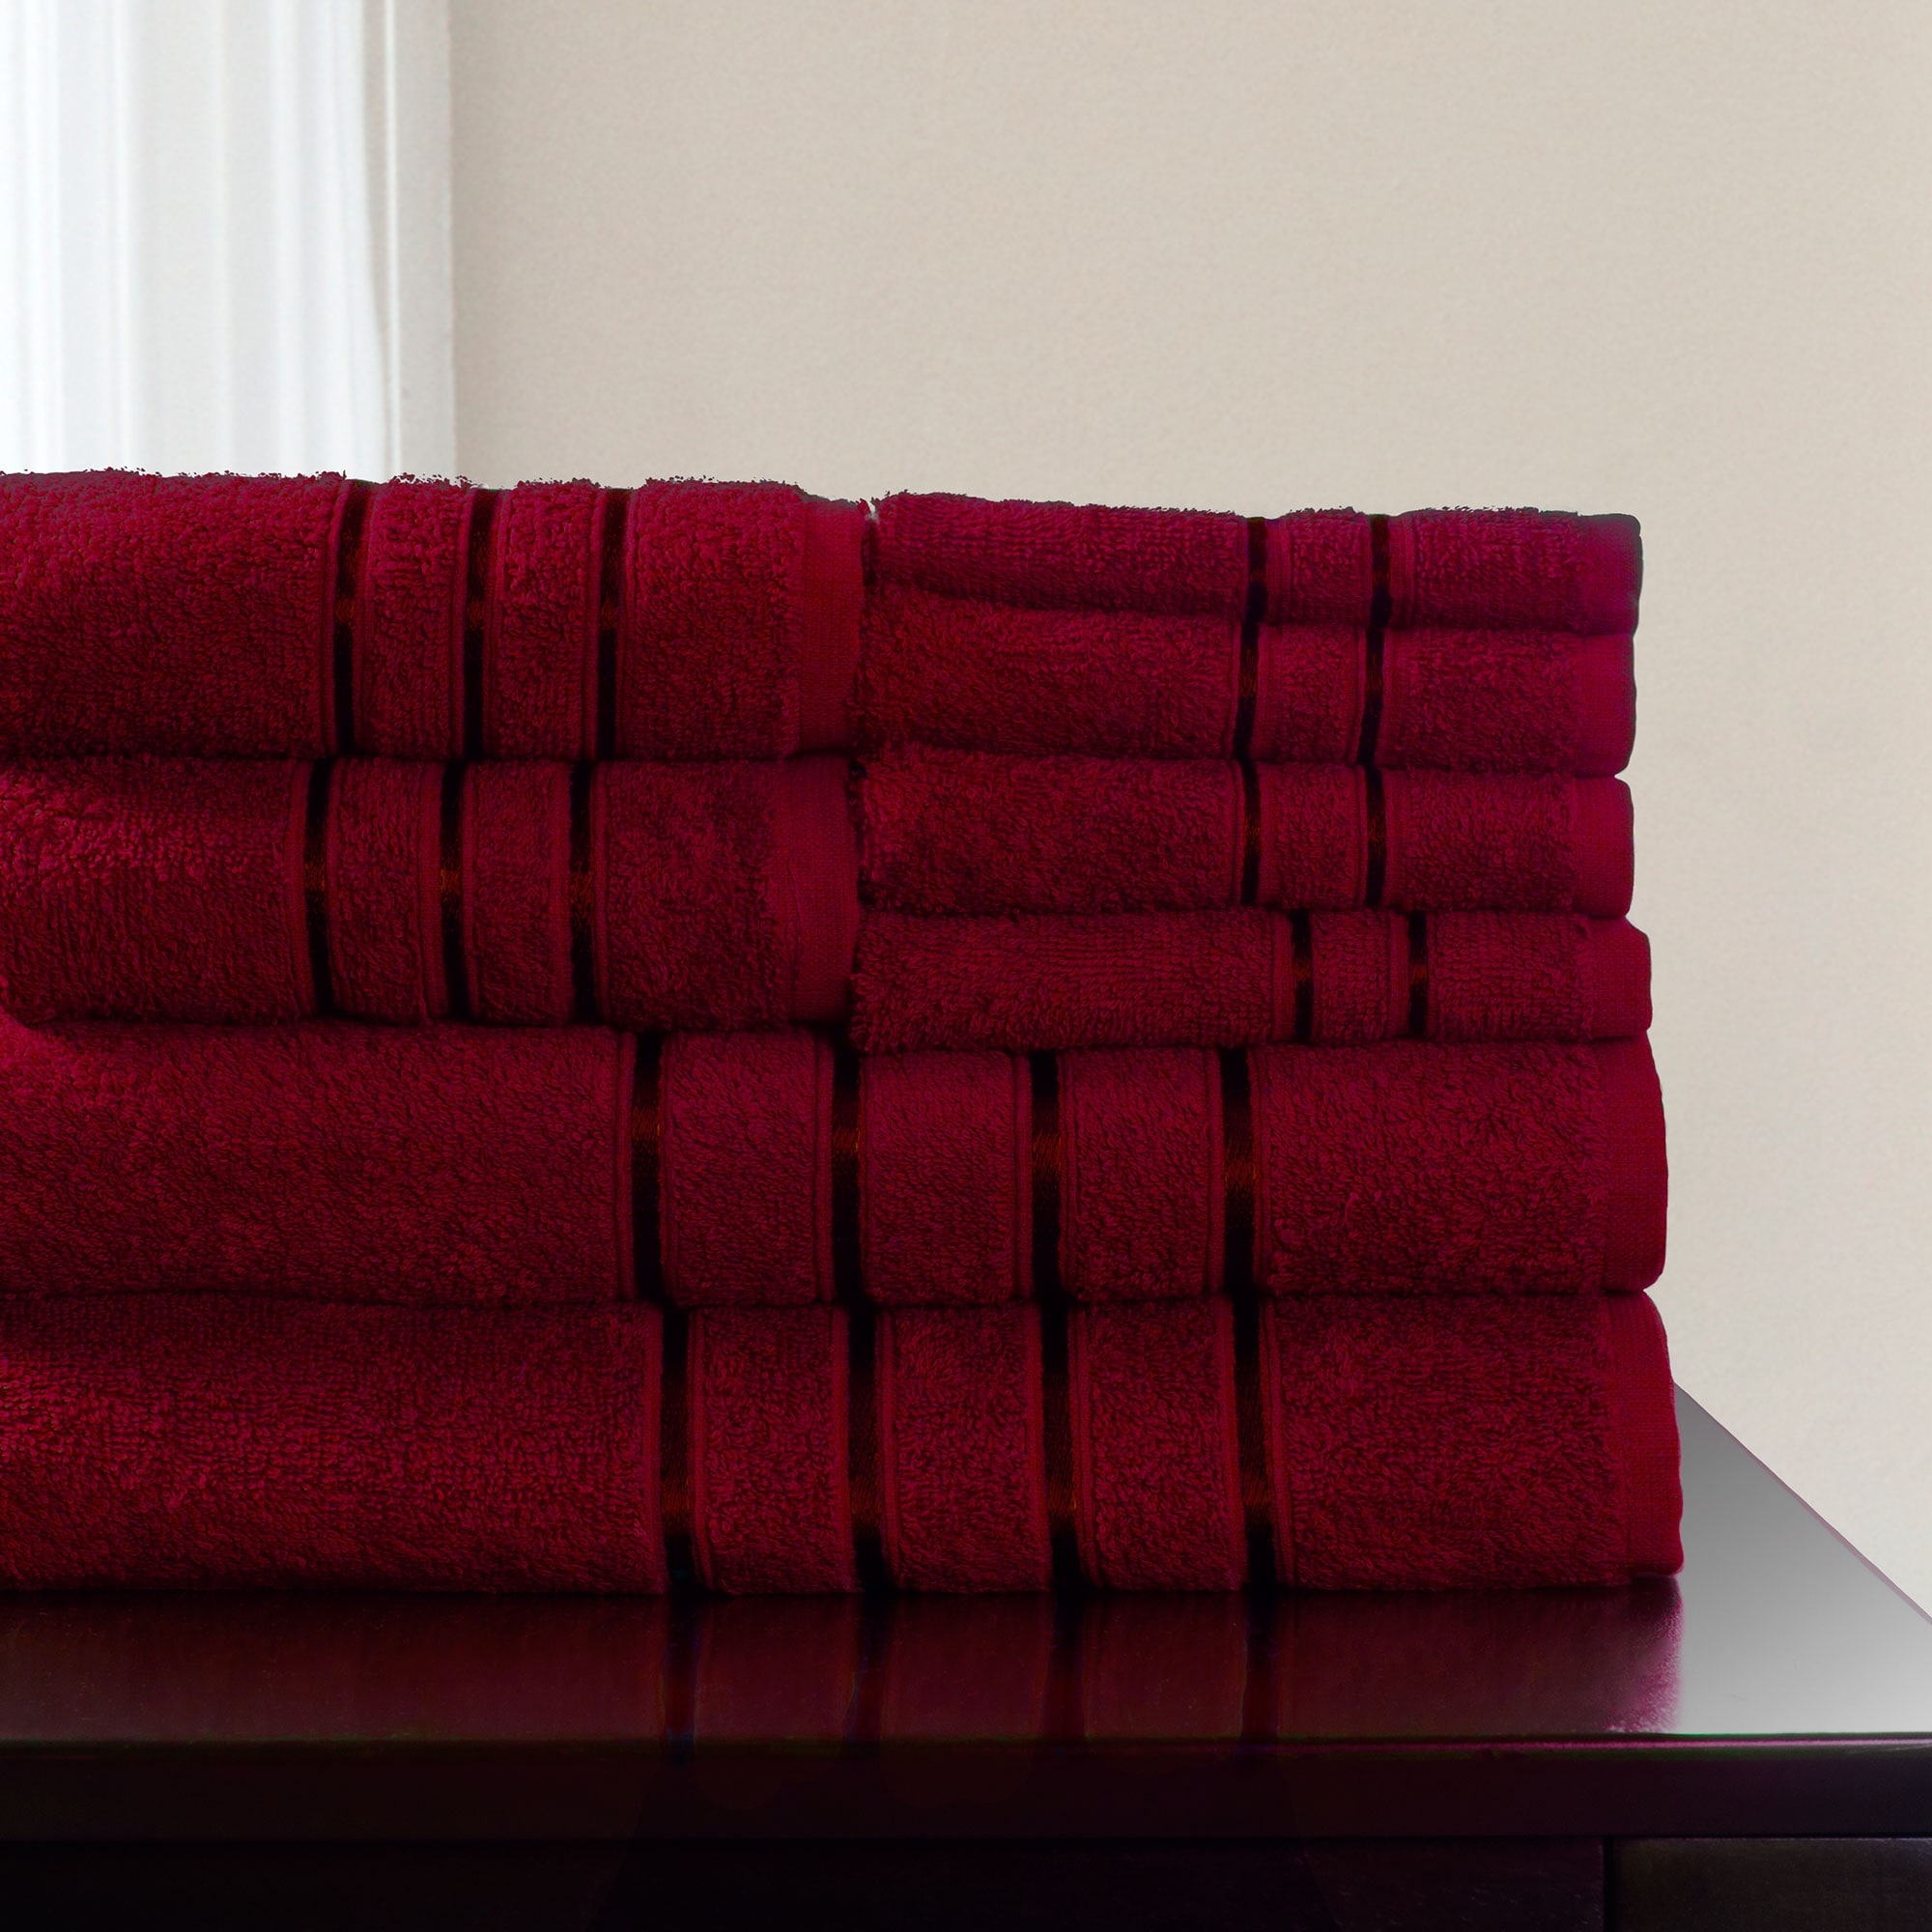 Washable Bathroom Towels - 8-Piece 100% Cotton Set with Washcloths, 2 Hand  Towels, and 2 Bath Towels by Lavish Home (Burgundy) - On Sale - Bed Bath &  Beyond - 39015950